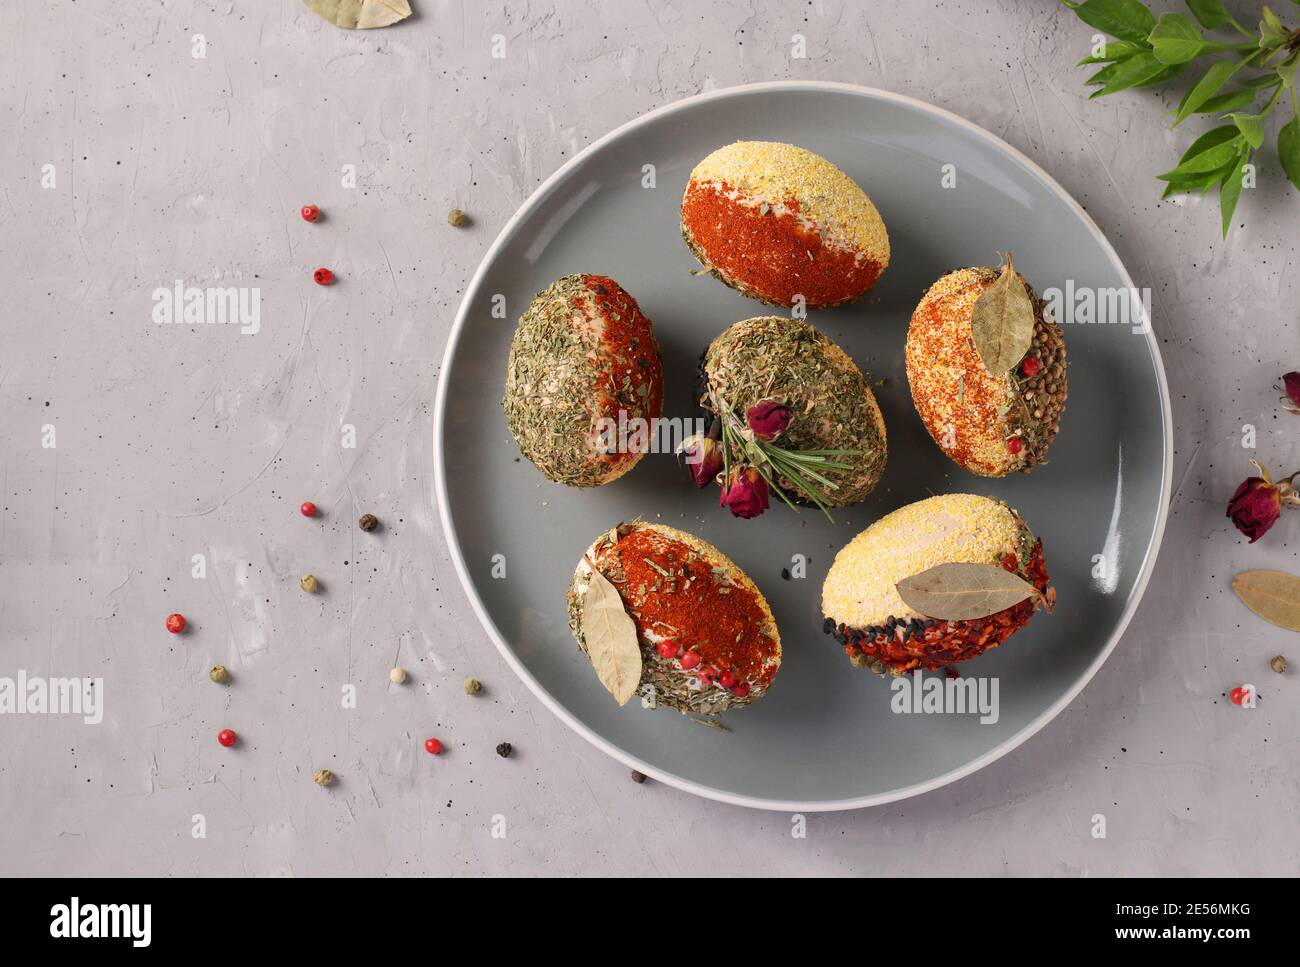 Easter eggs decorated with different spices and cereals without dyes and preservatives on a plate on a gray concrete background. View from above Stock Photo